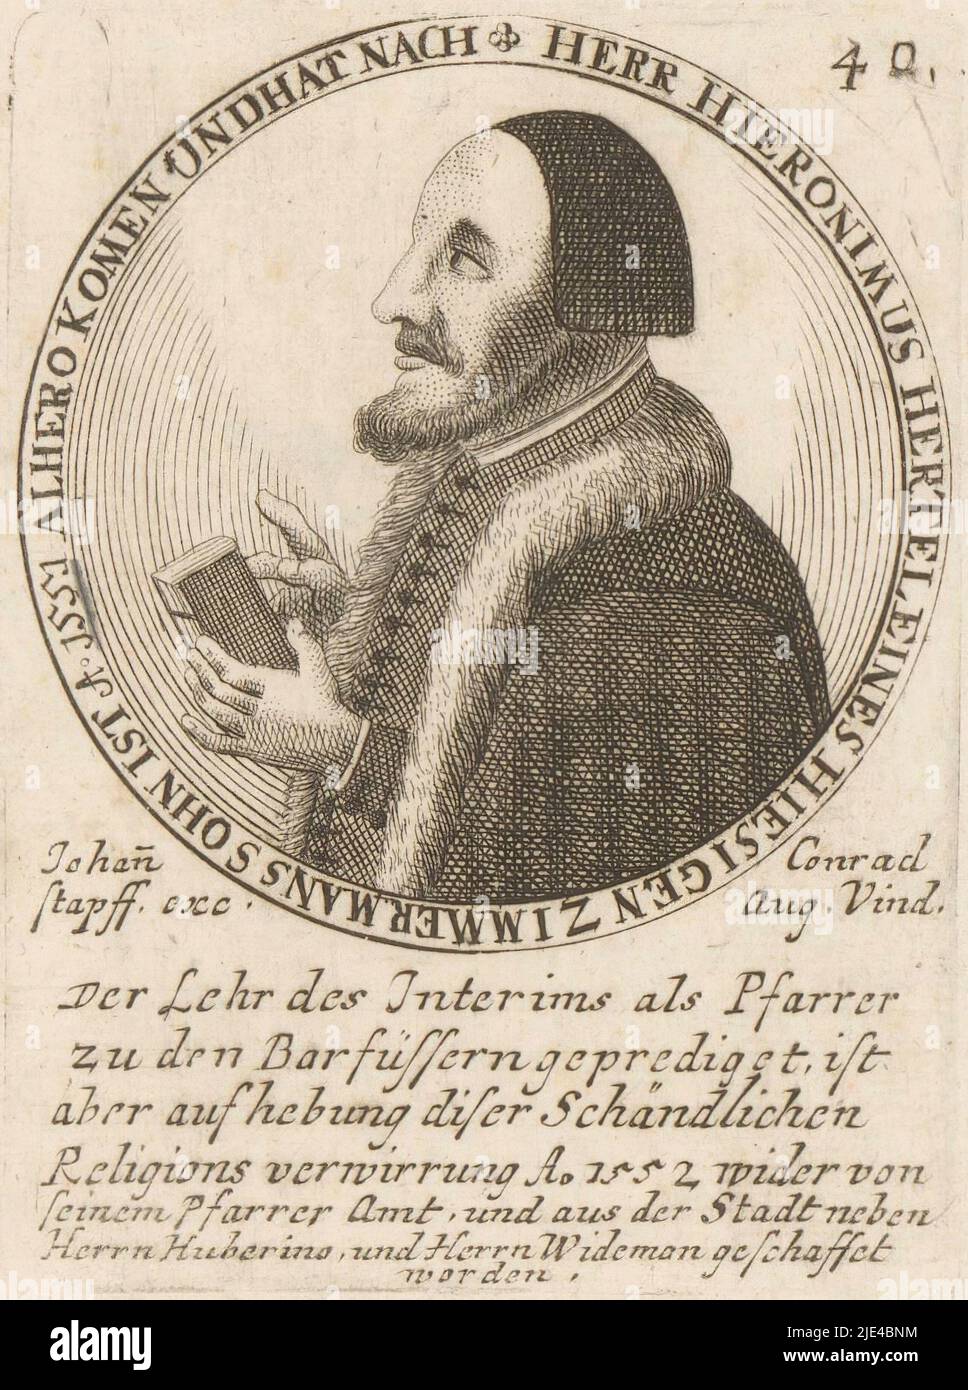 Portrait of Hieronymus Hertel, anonymous, Johann Conrad Stapf (16th century), 1551 - c. 1600, Numbered upper right: 40., print maker: anonymous, publisher: Johann Conrad Stapf (16e eeuw), (mentioned on object), Augsburg, 1551 - c. 1600, paper, engraving, etching, h 104 mm - w 77 mm Stock Photo